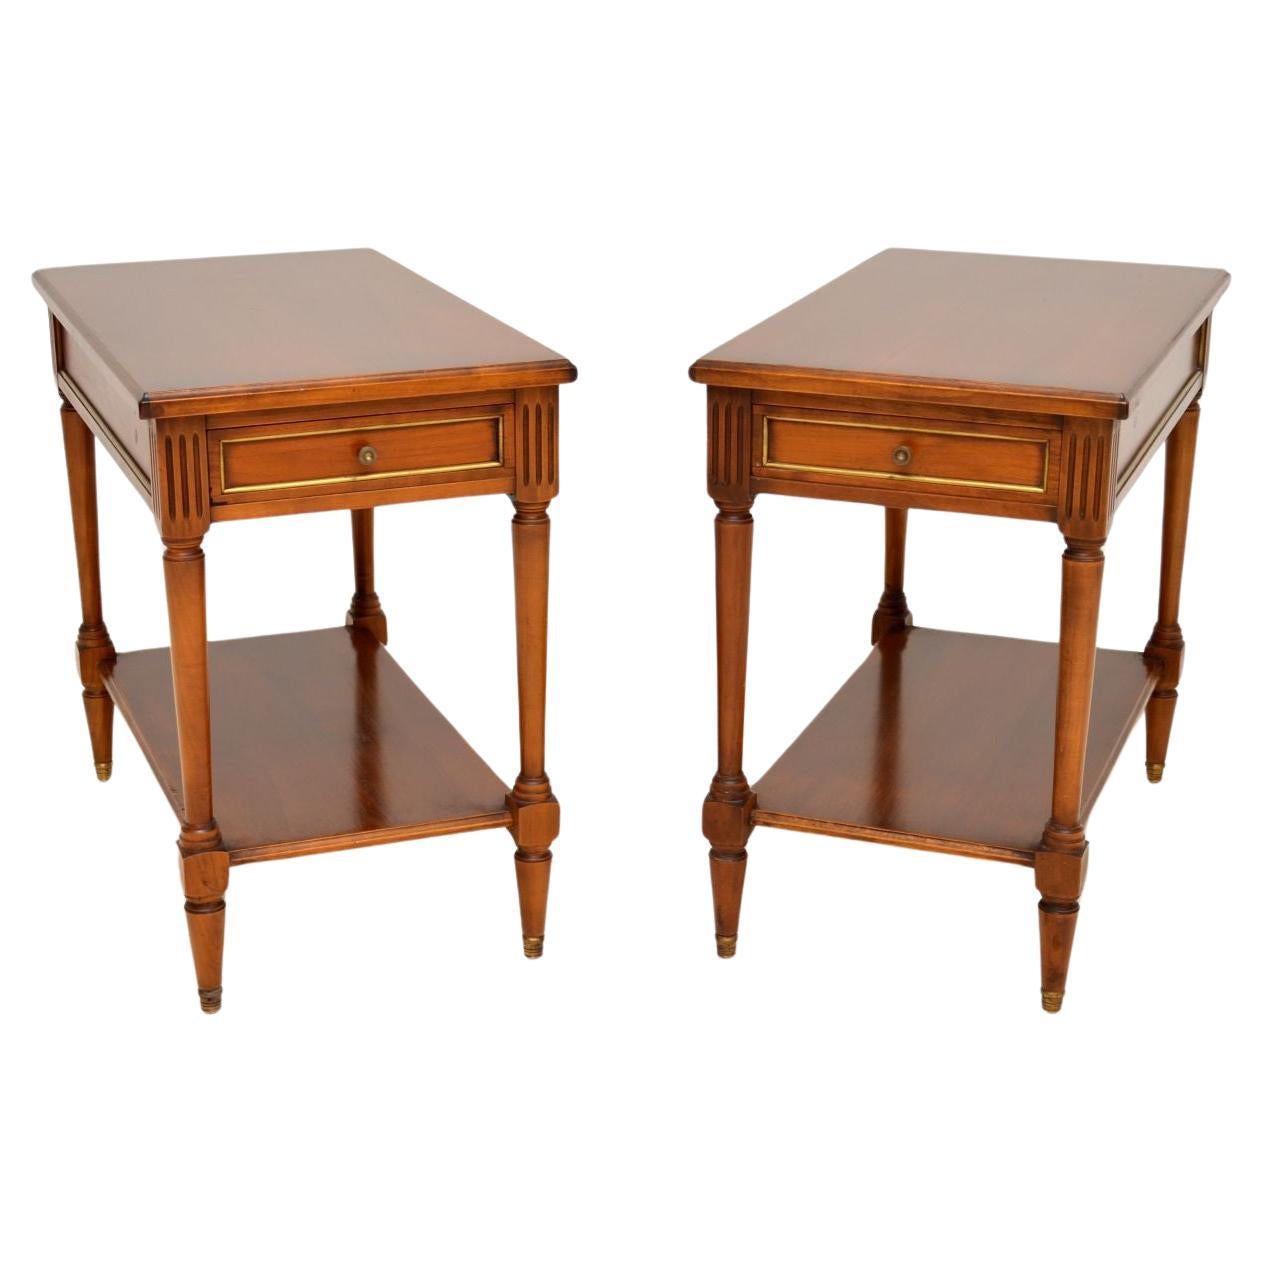 Pair of Antique Georgian Style Walnut Side Tables